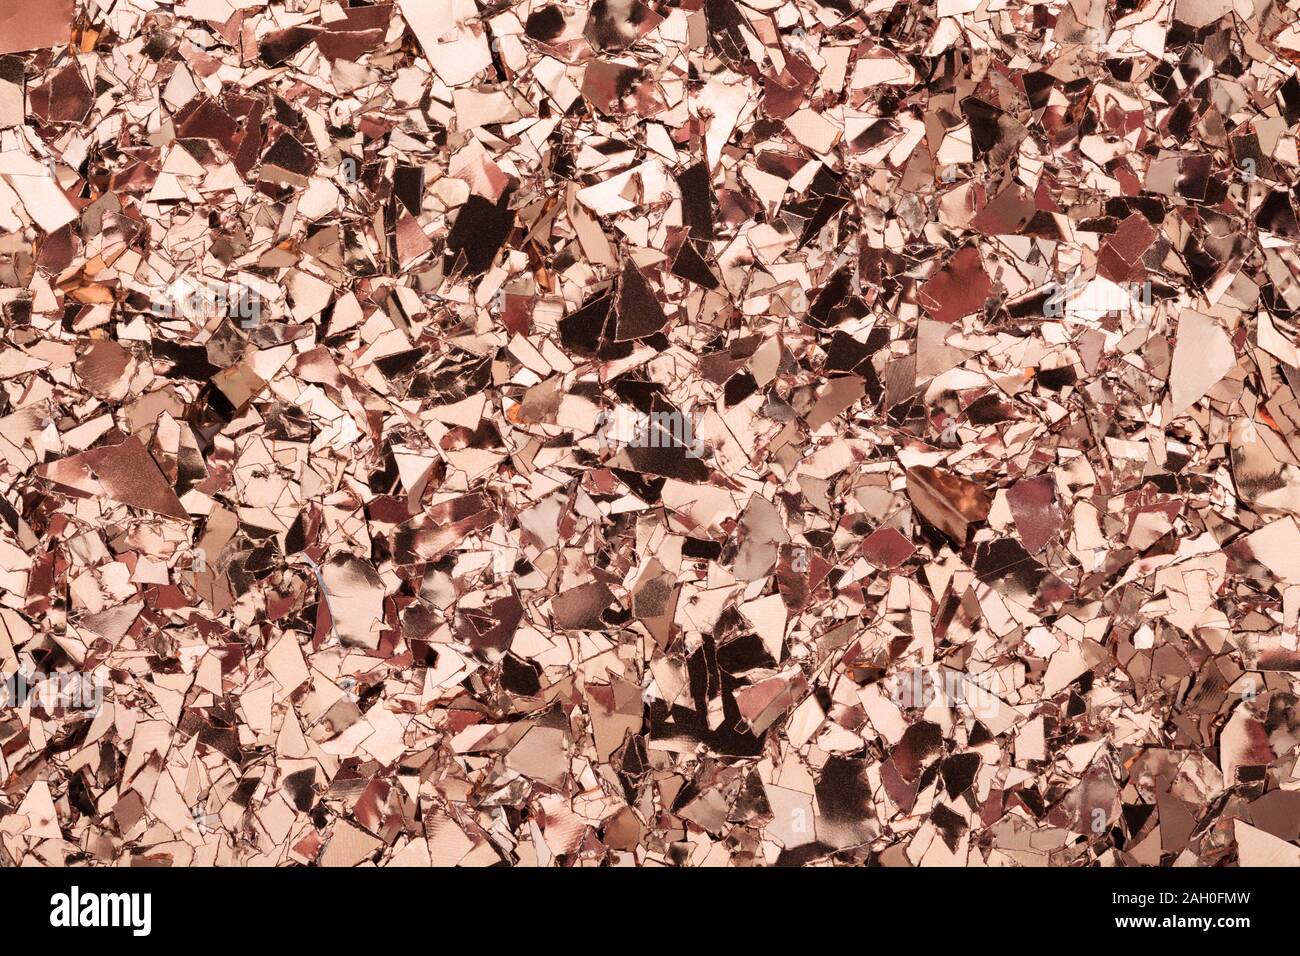 Pink Gold glitter foil confetti background. Festive, party or holiday backdrop. Flat-lay, close-up. Stock Photo